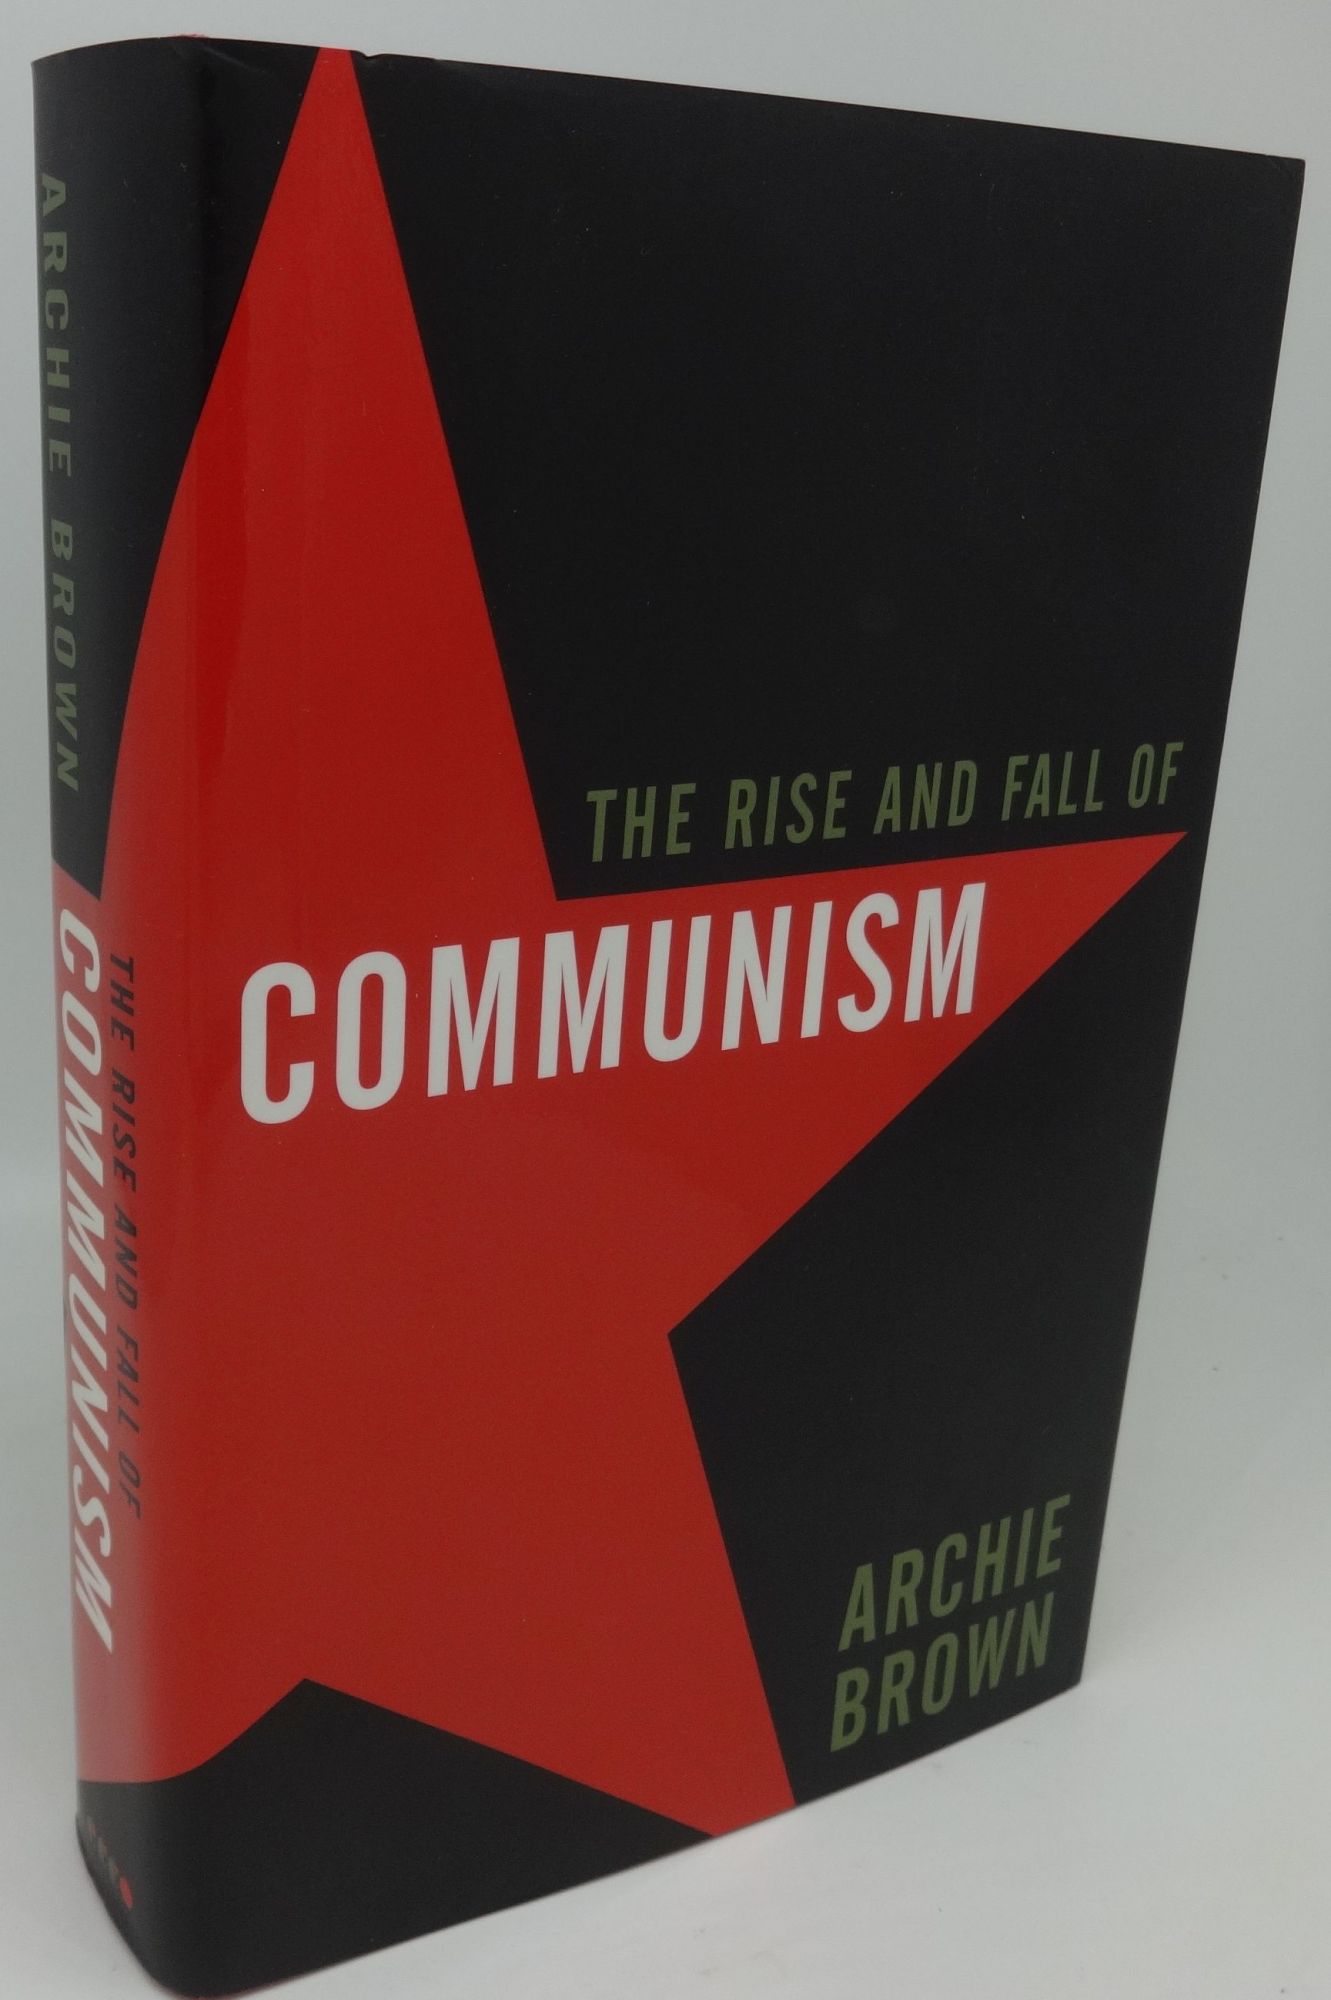 THE RISE AND FALL OF COMMUNISM - Archie Brown